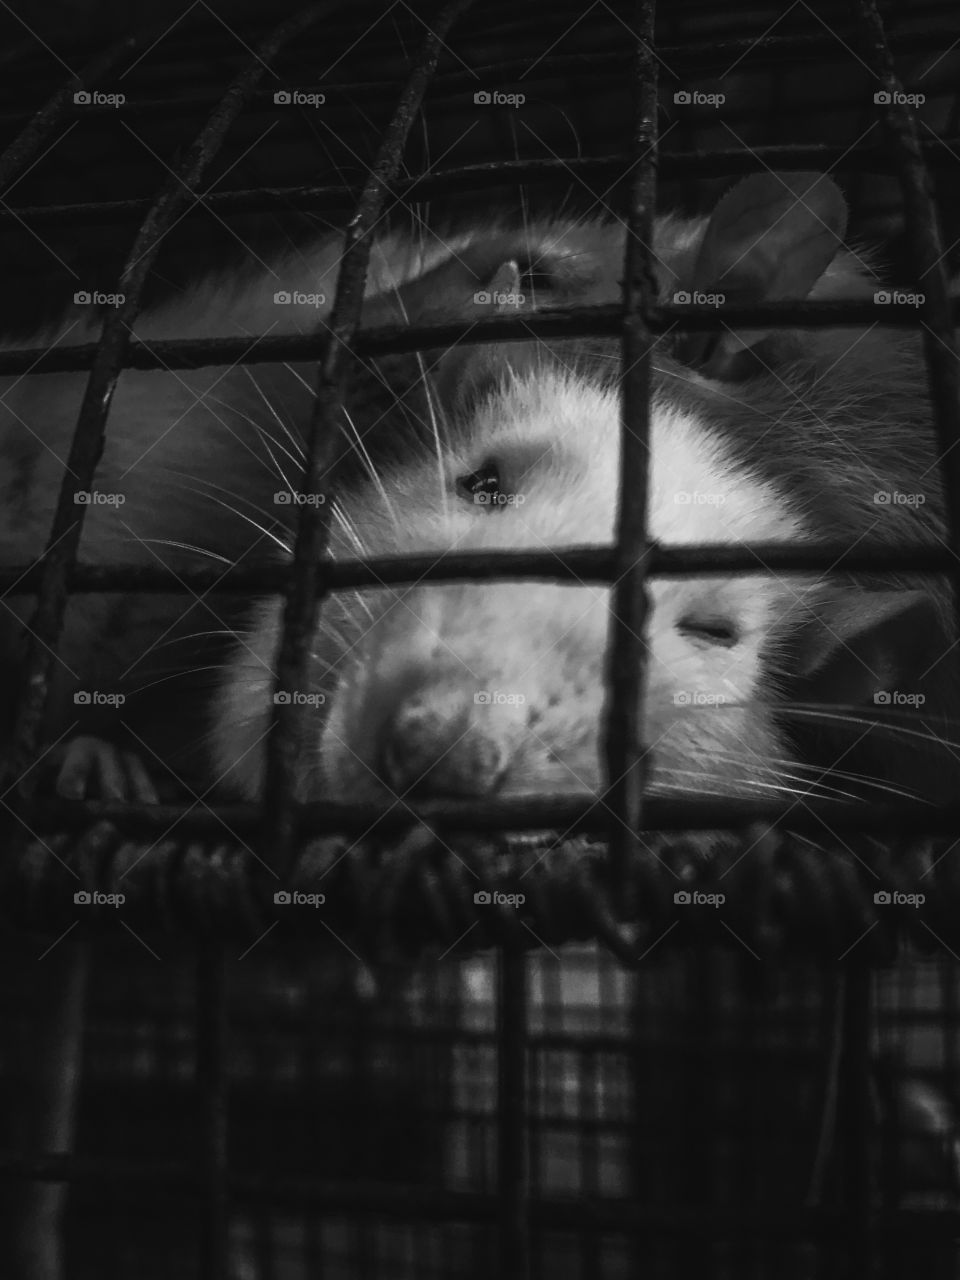 The capturing of wildlife is now a common problem they are stranded and kept in a cage they lose their freedom first and in many cases their life’s are taken this photo depicts the pain in a white rats face in one such situation.